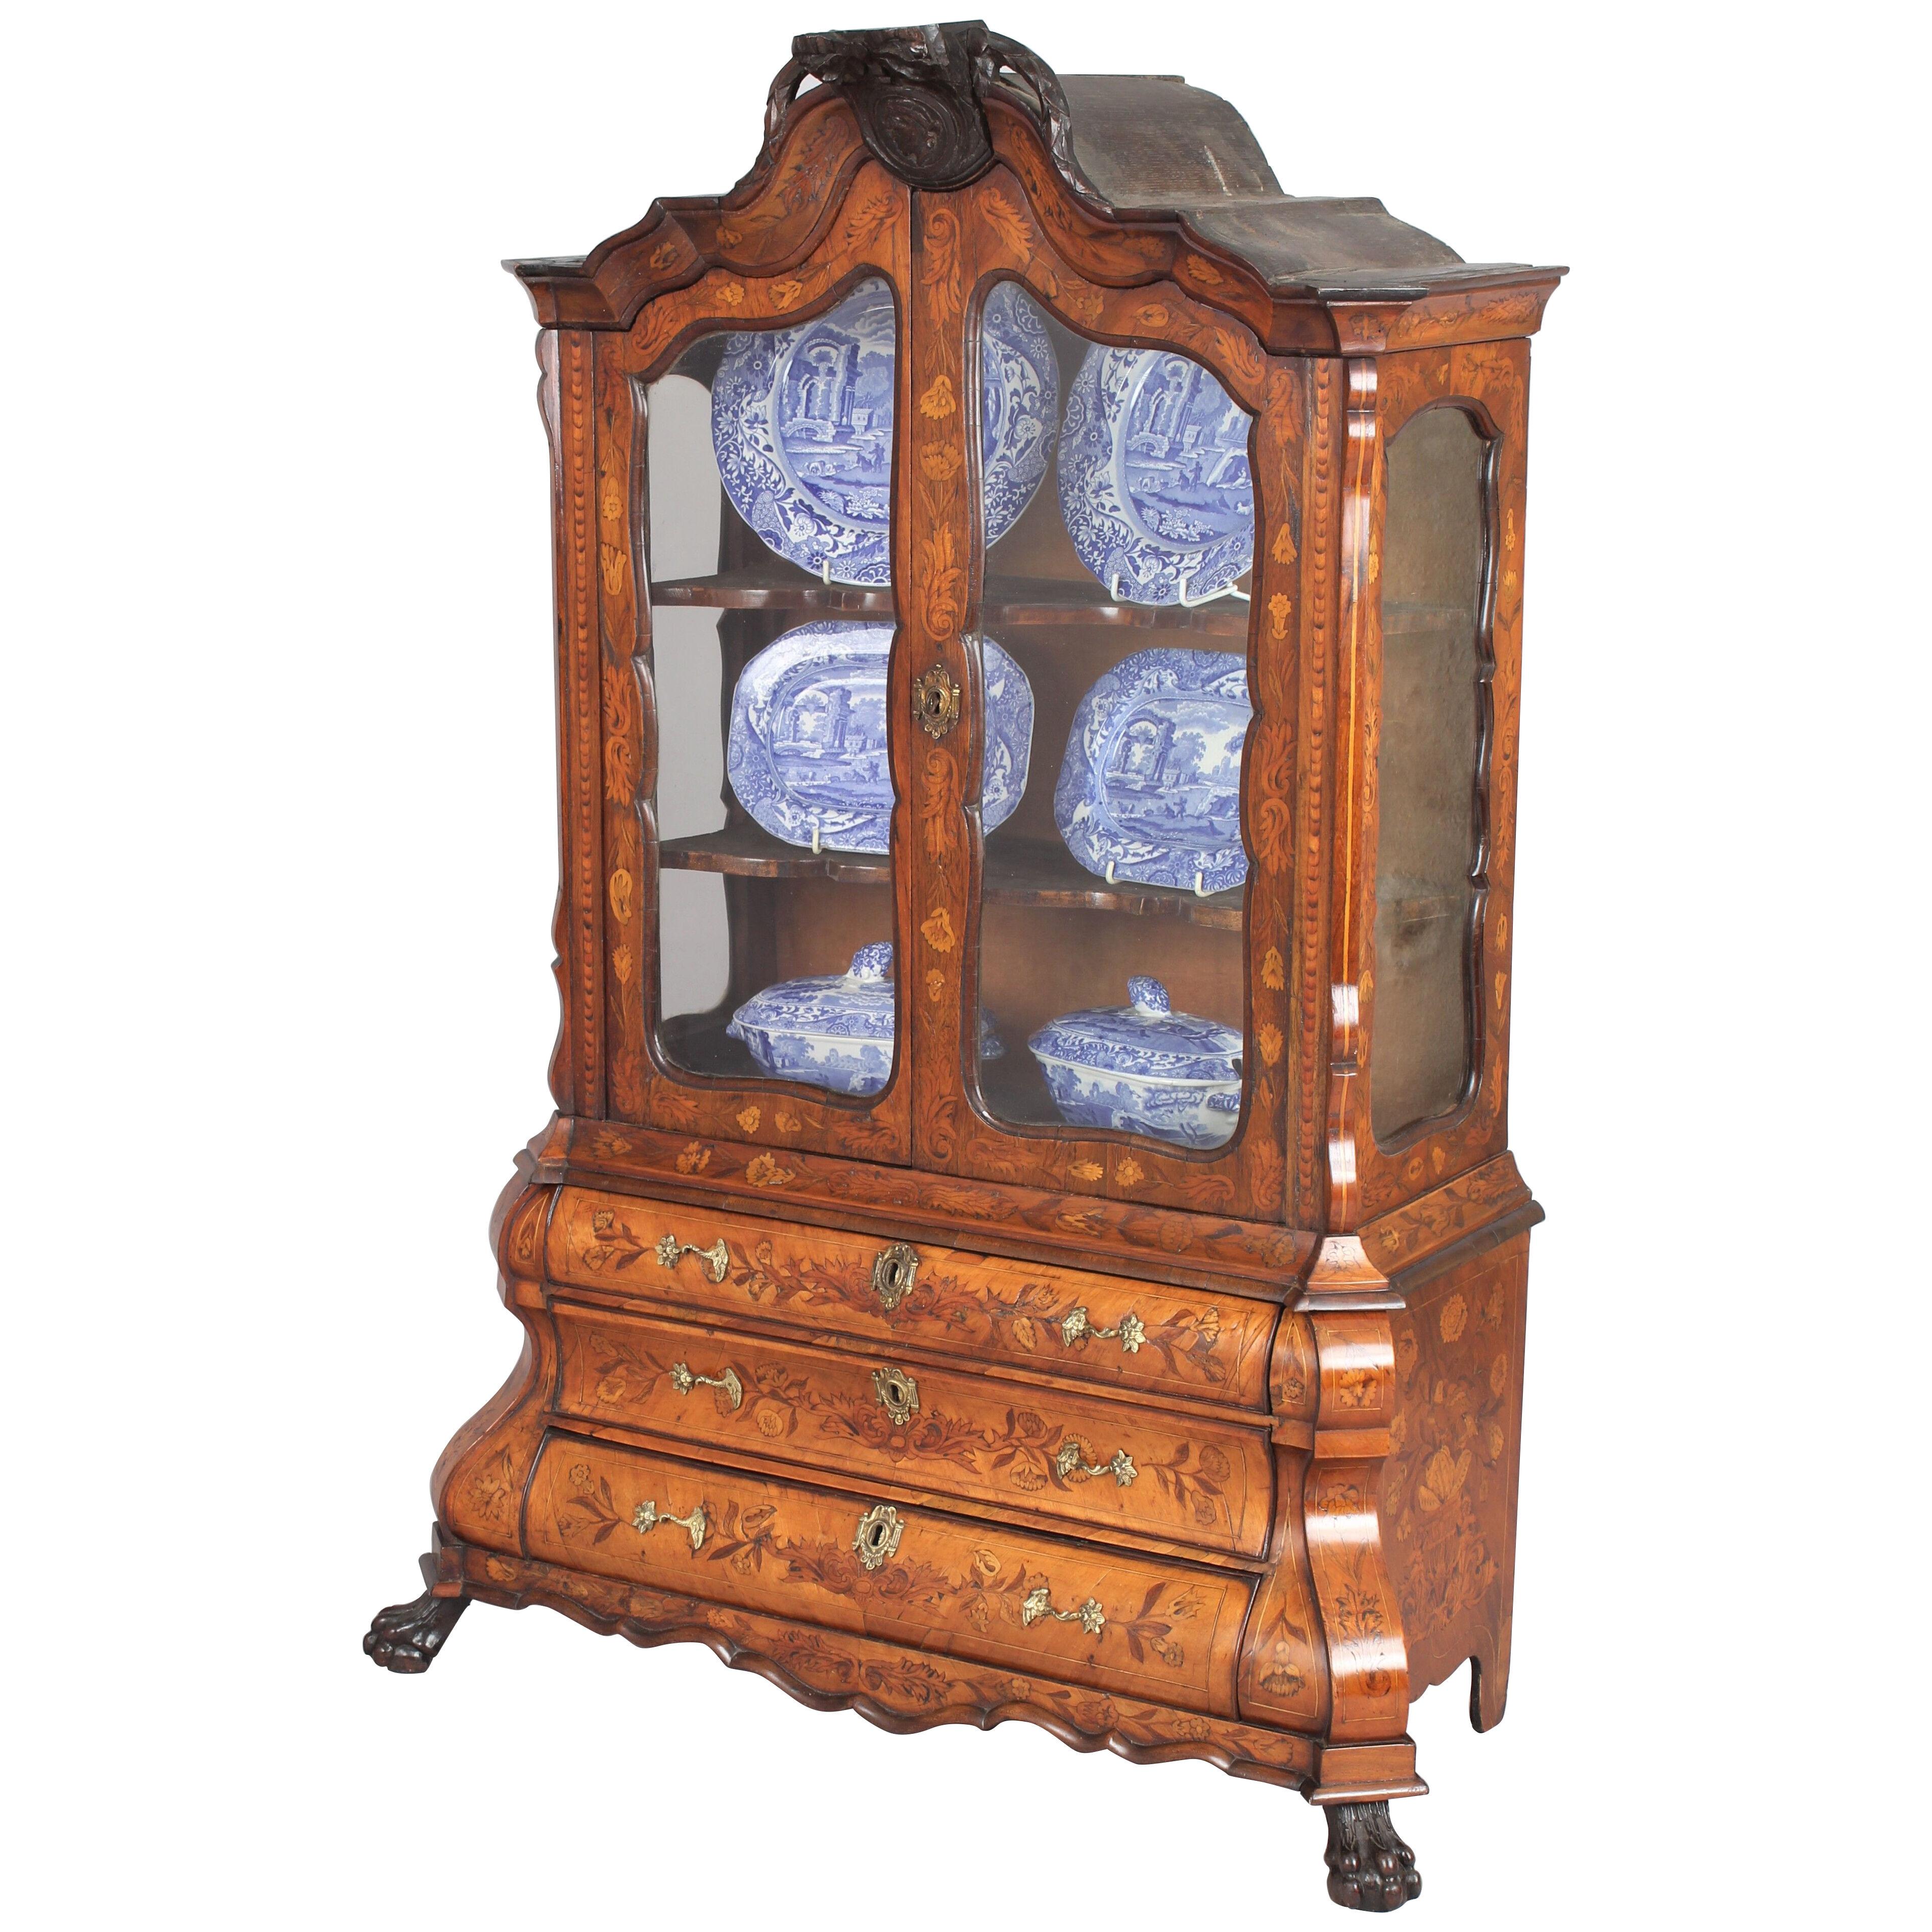 A fine late 18th/19th century Dutch marquetry display cabinet